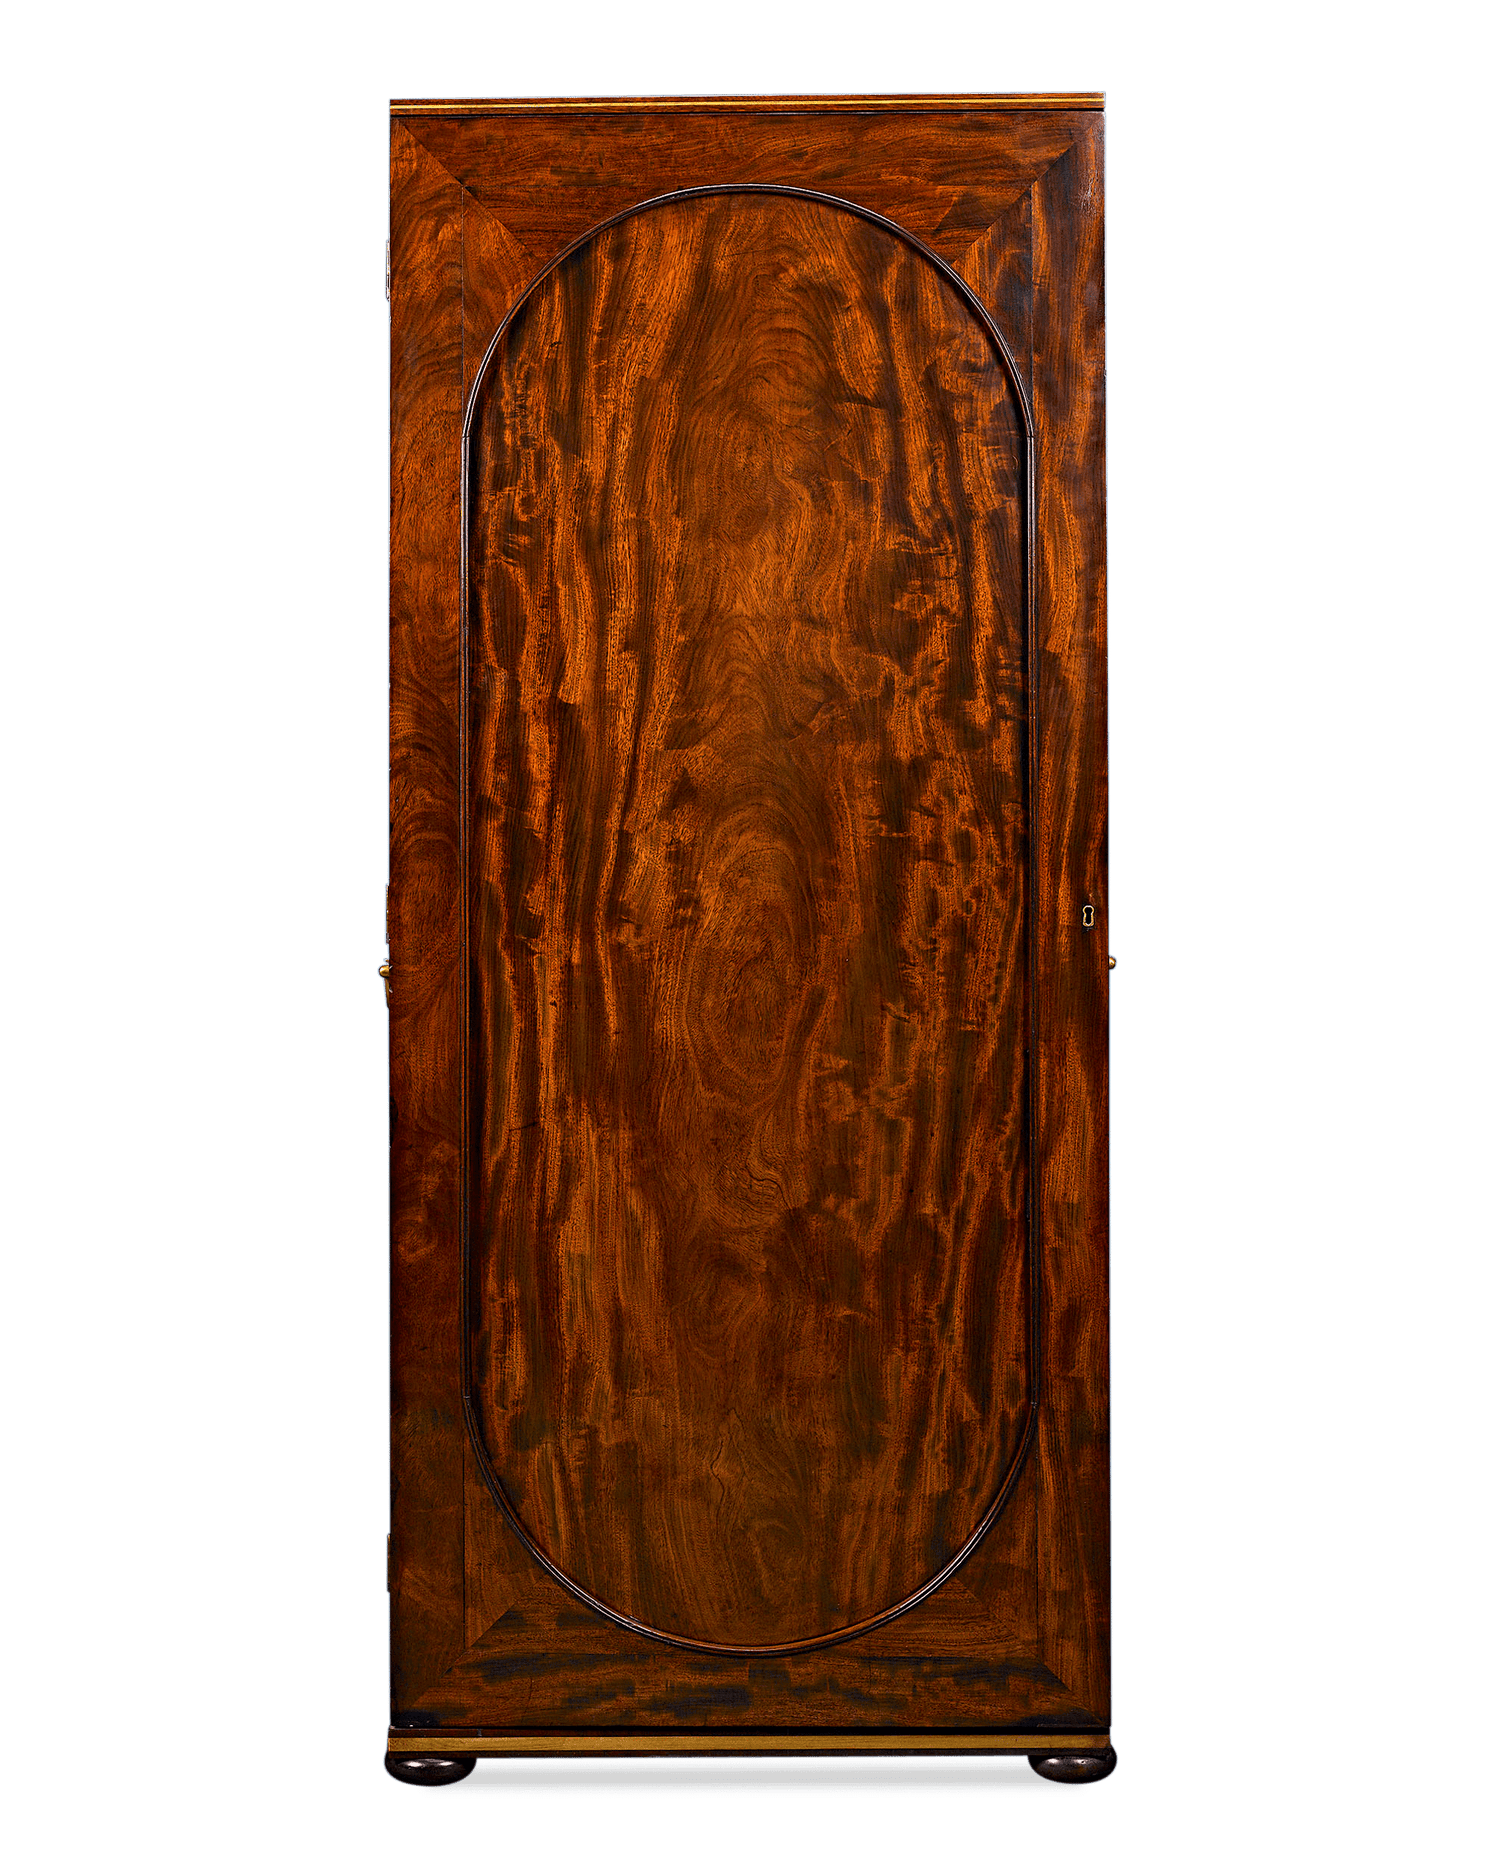 A door of shimmering mahogany fronts this exceptional English upright cane cabinet